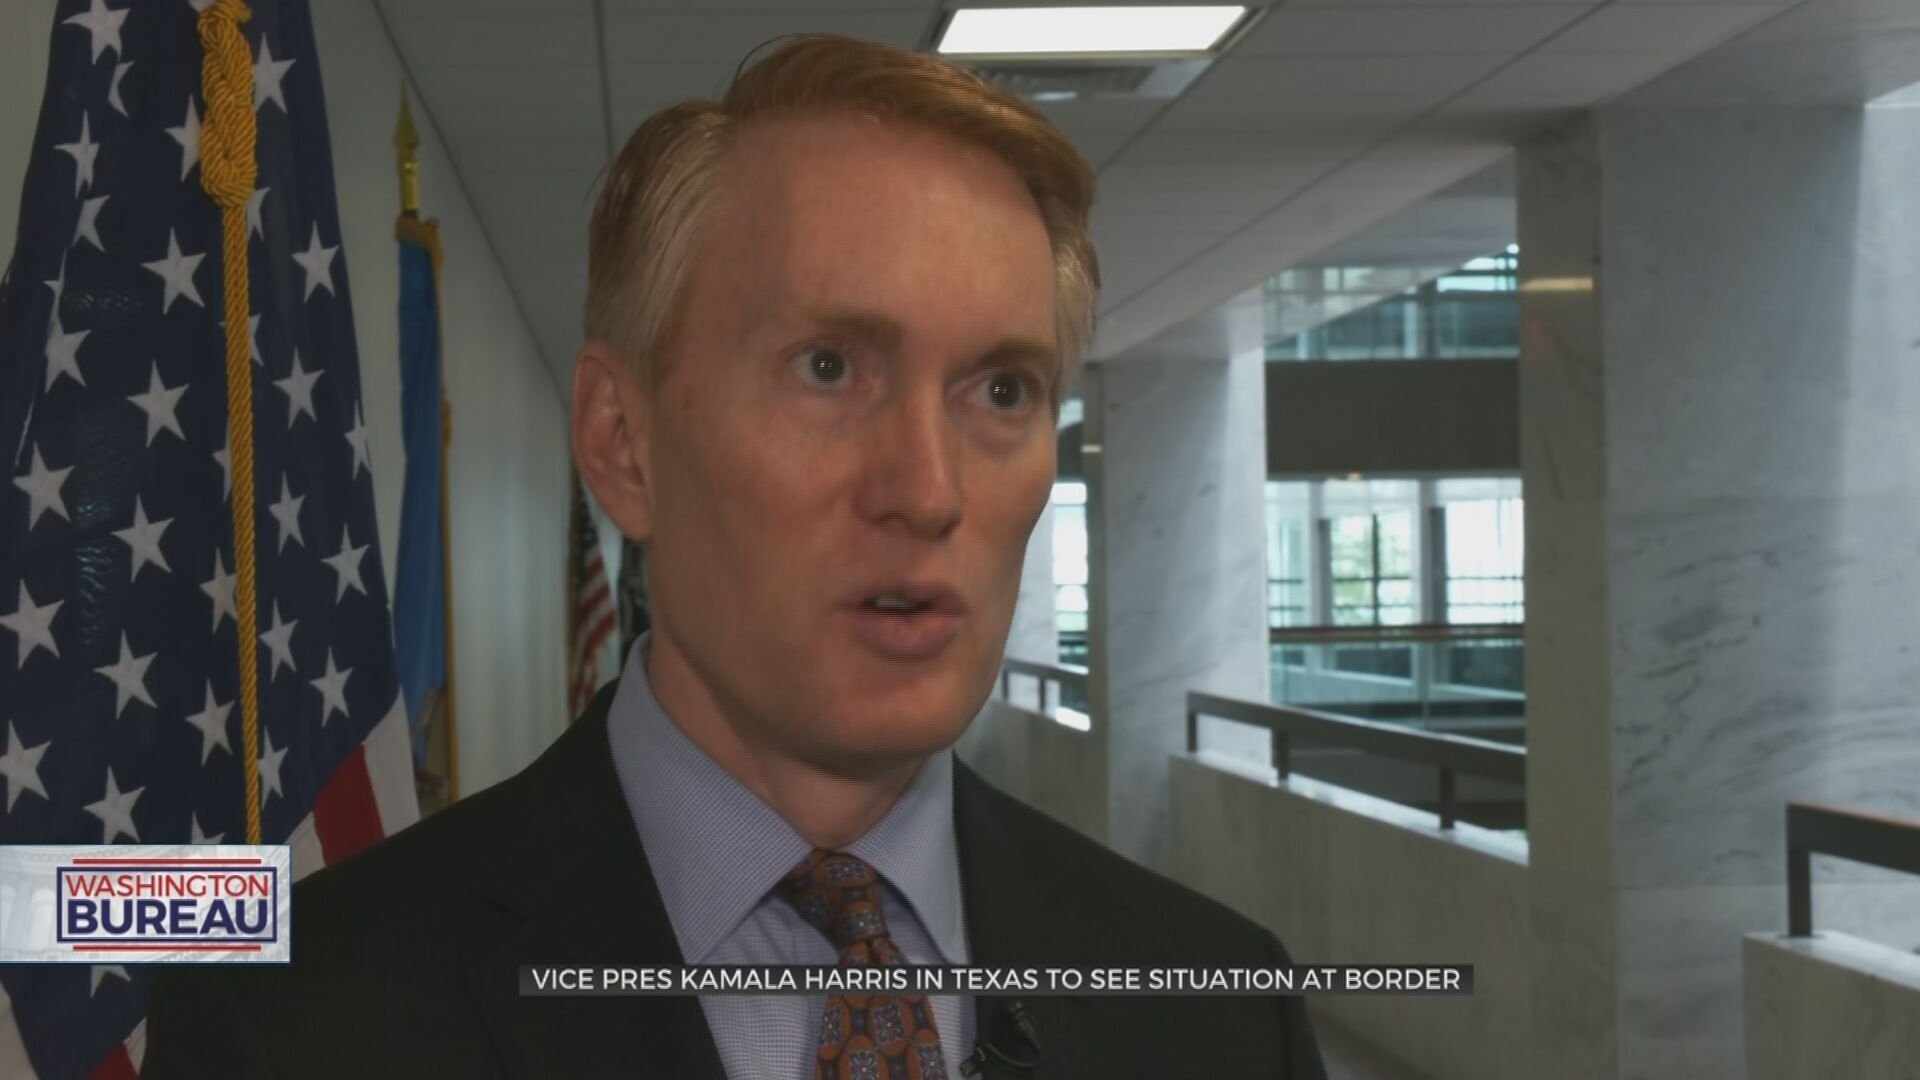 Sen. Lankford Hopes VP Harris’ Trip To Texas Provides Accurate Context For Border Situation 